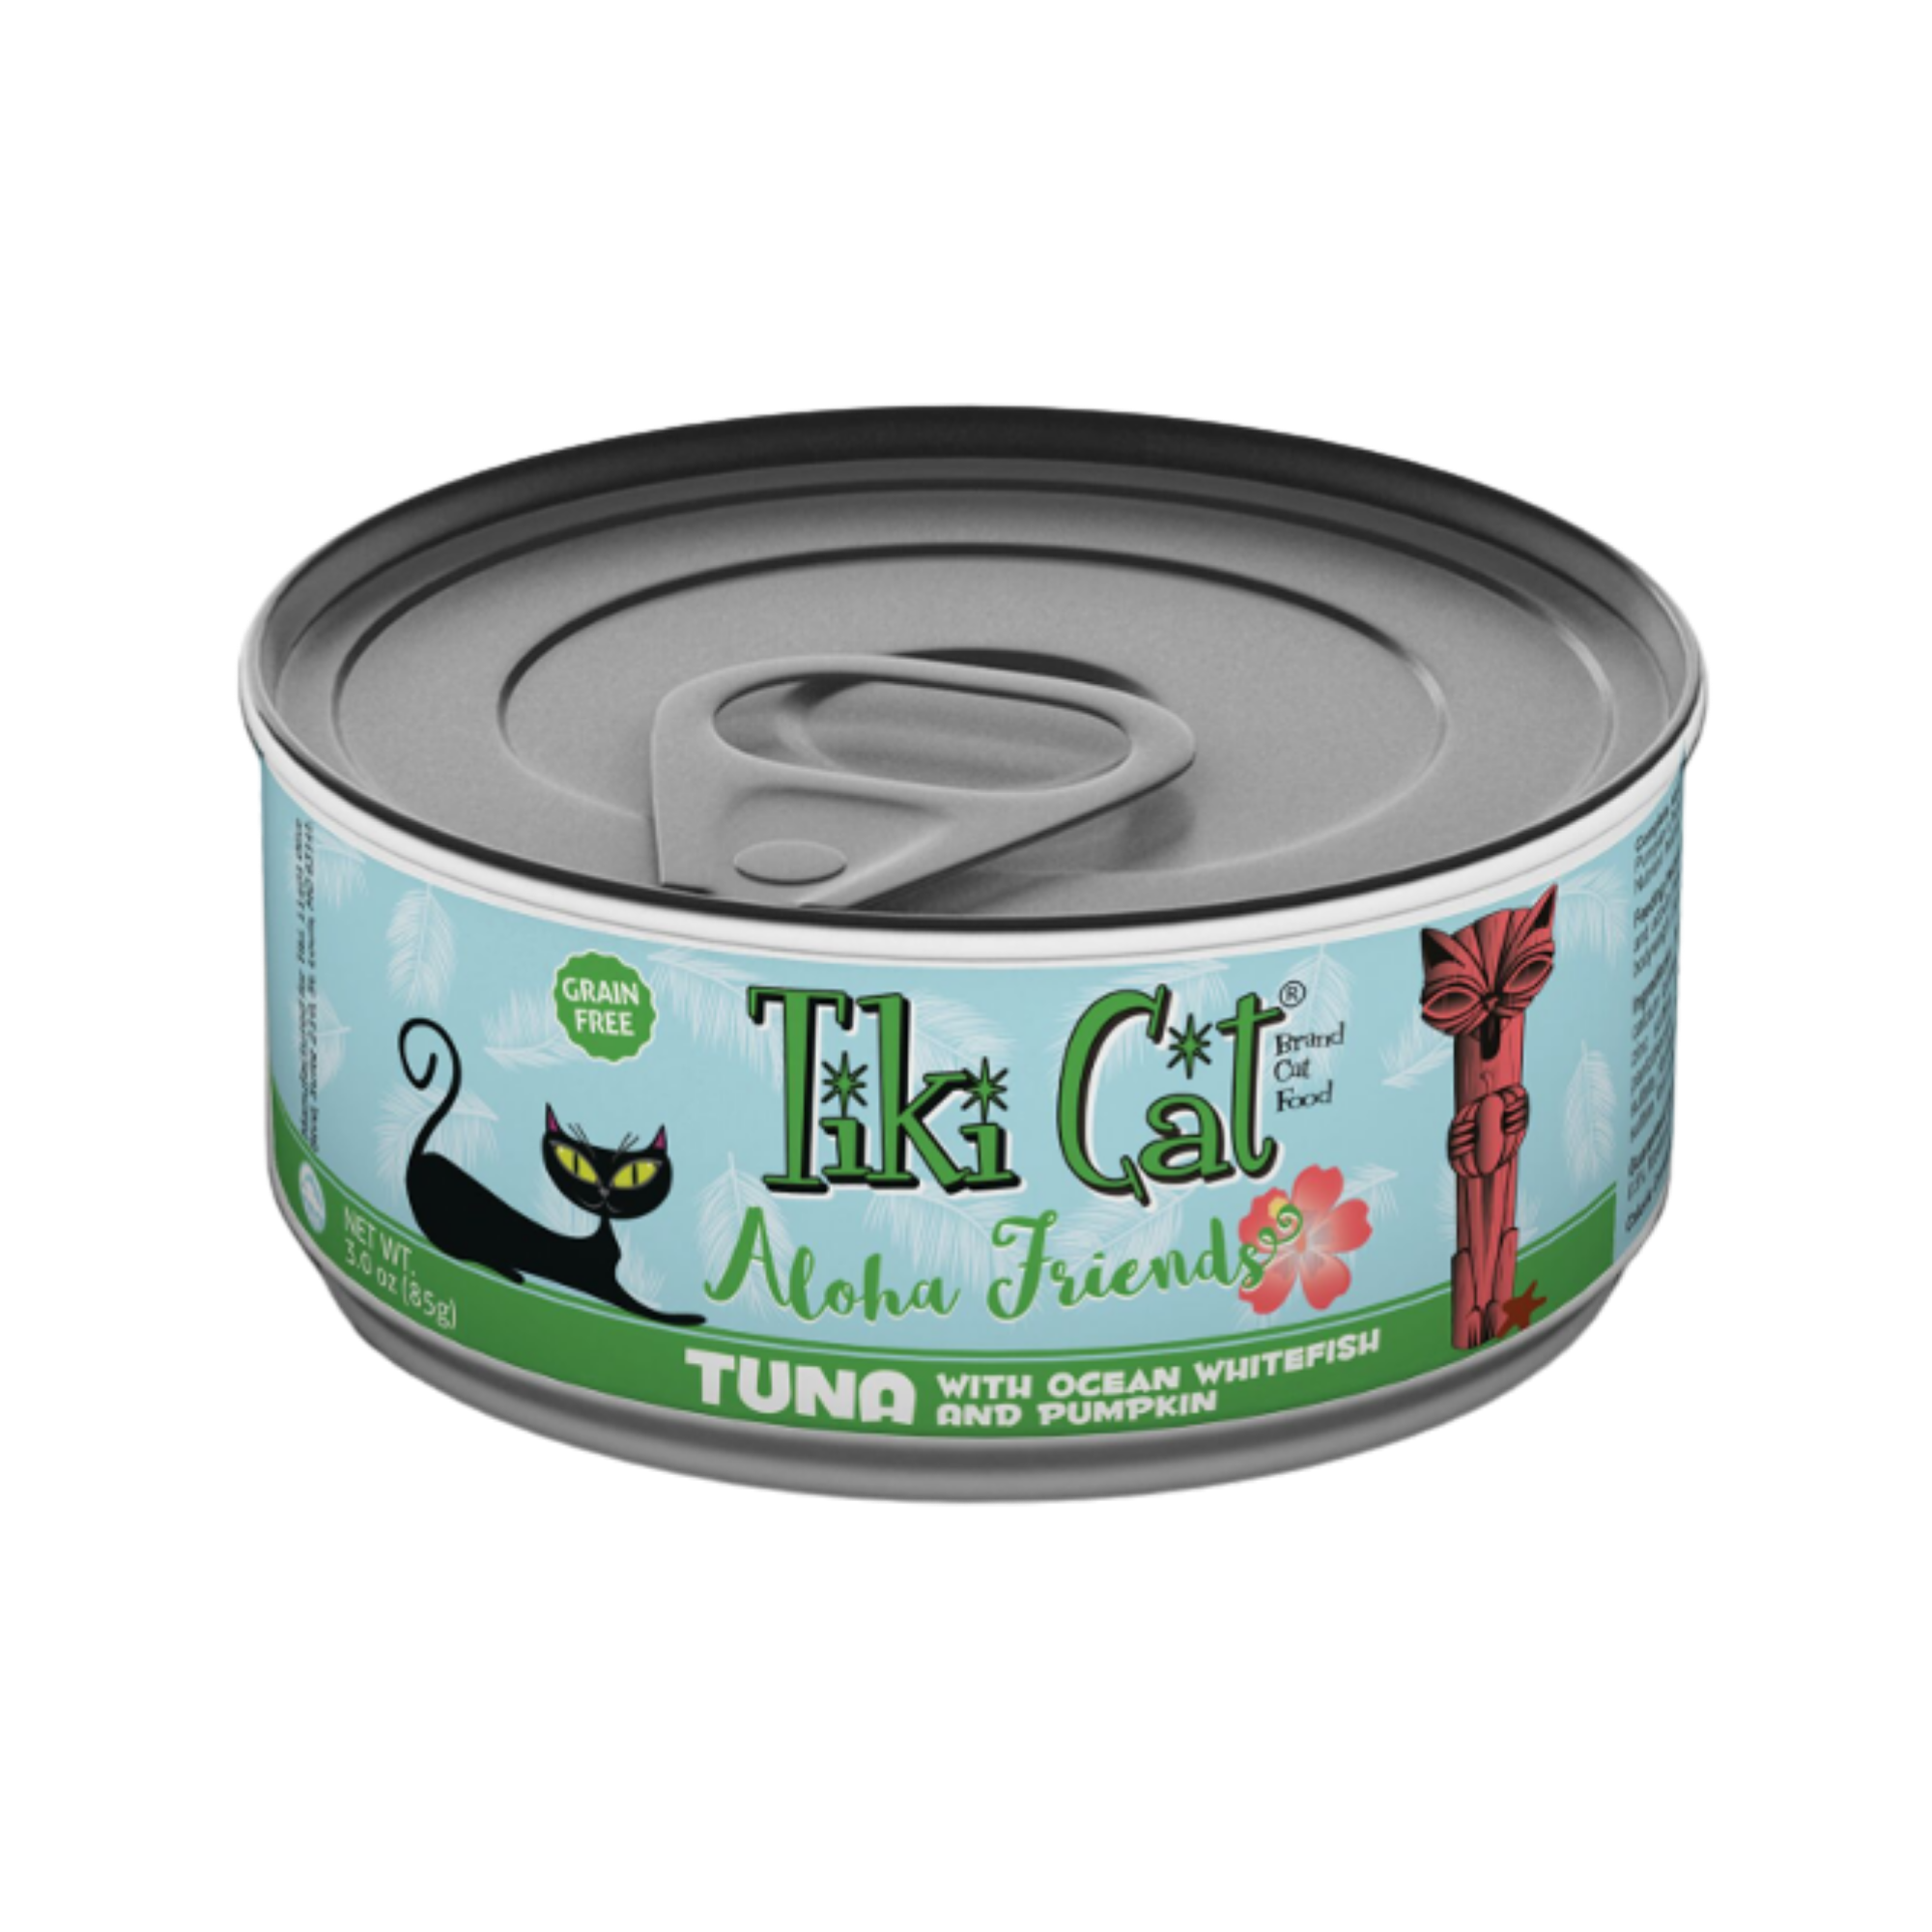 Tiki Cat Aloha Friends Tuna with Ocean Whitefish Canned Cat Food